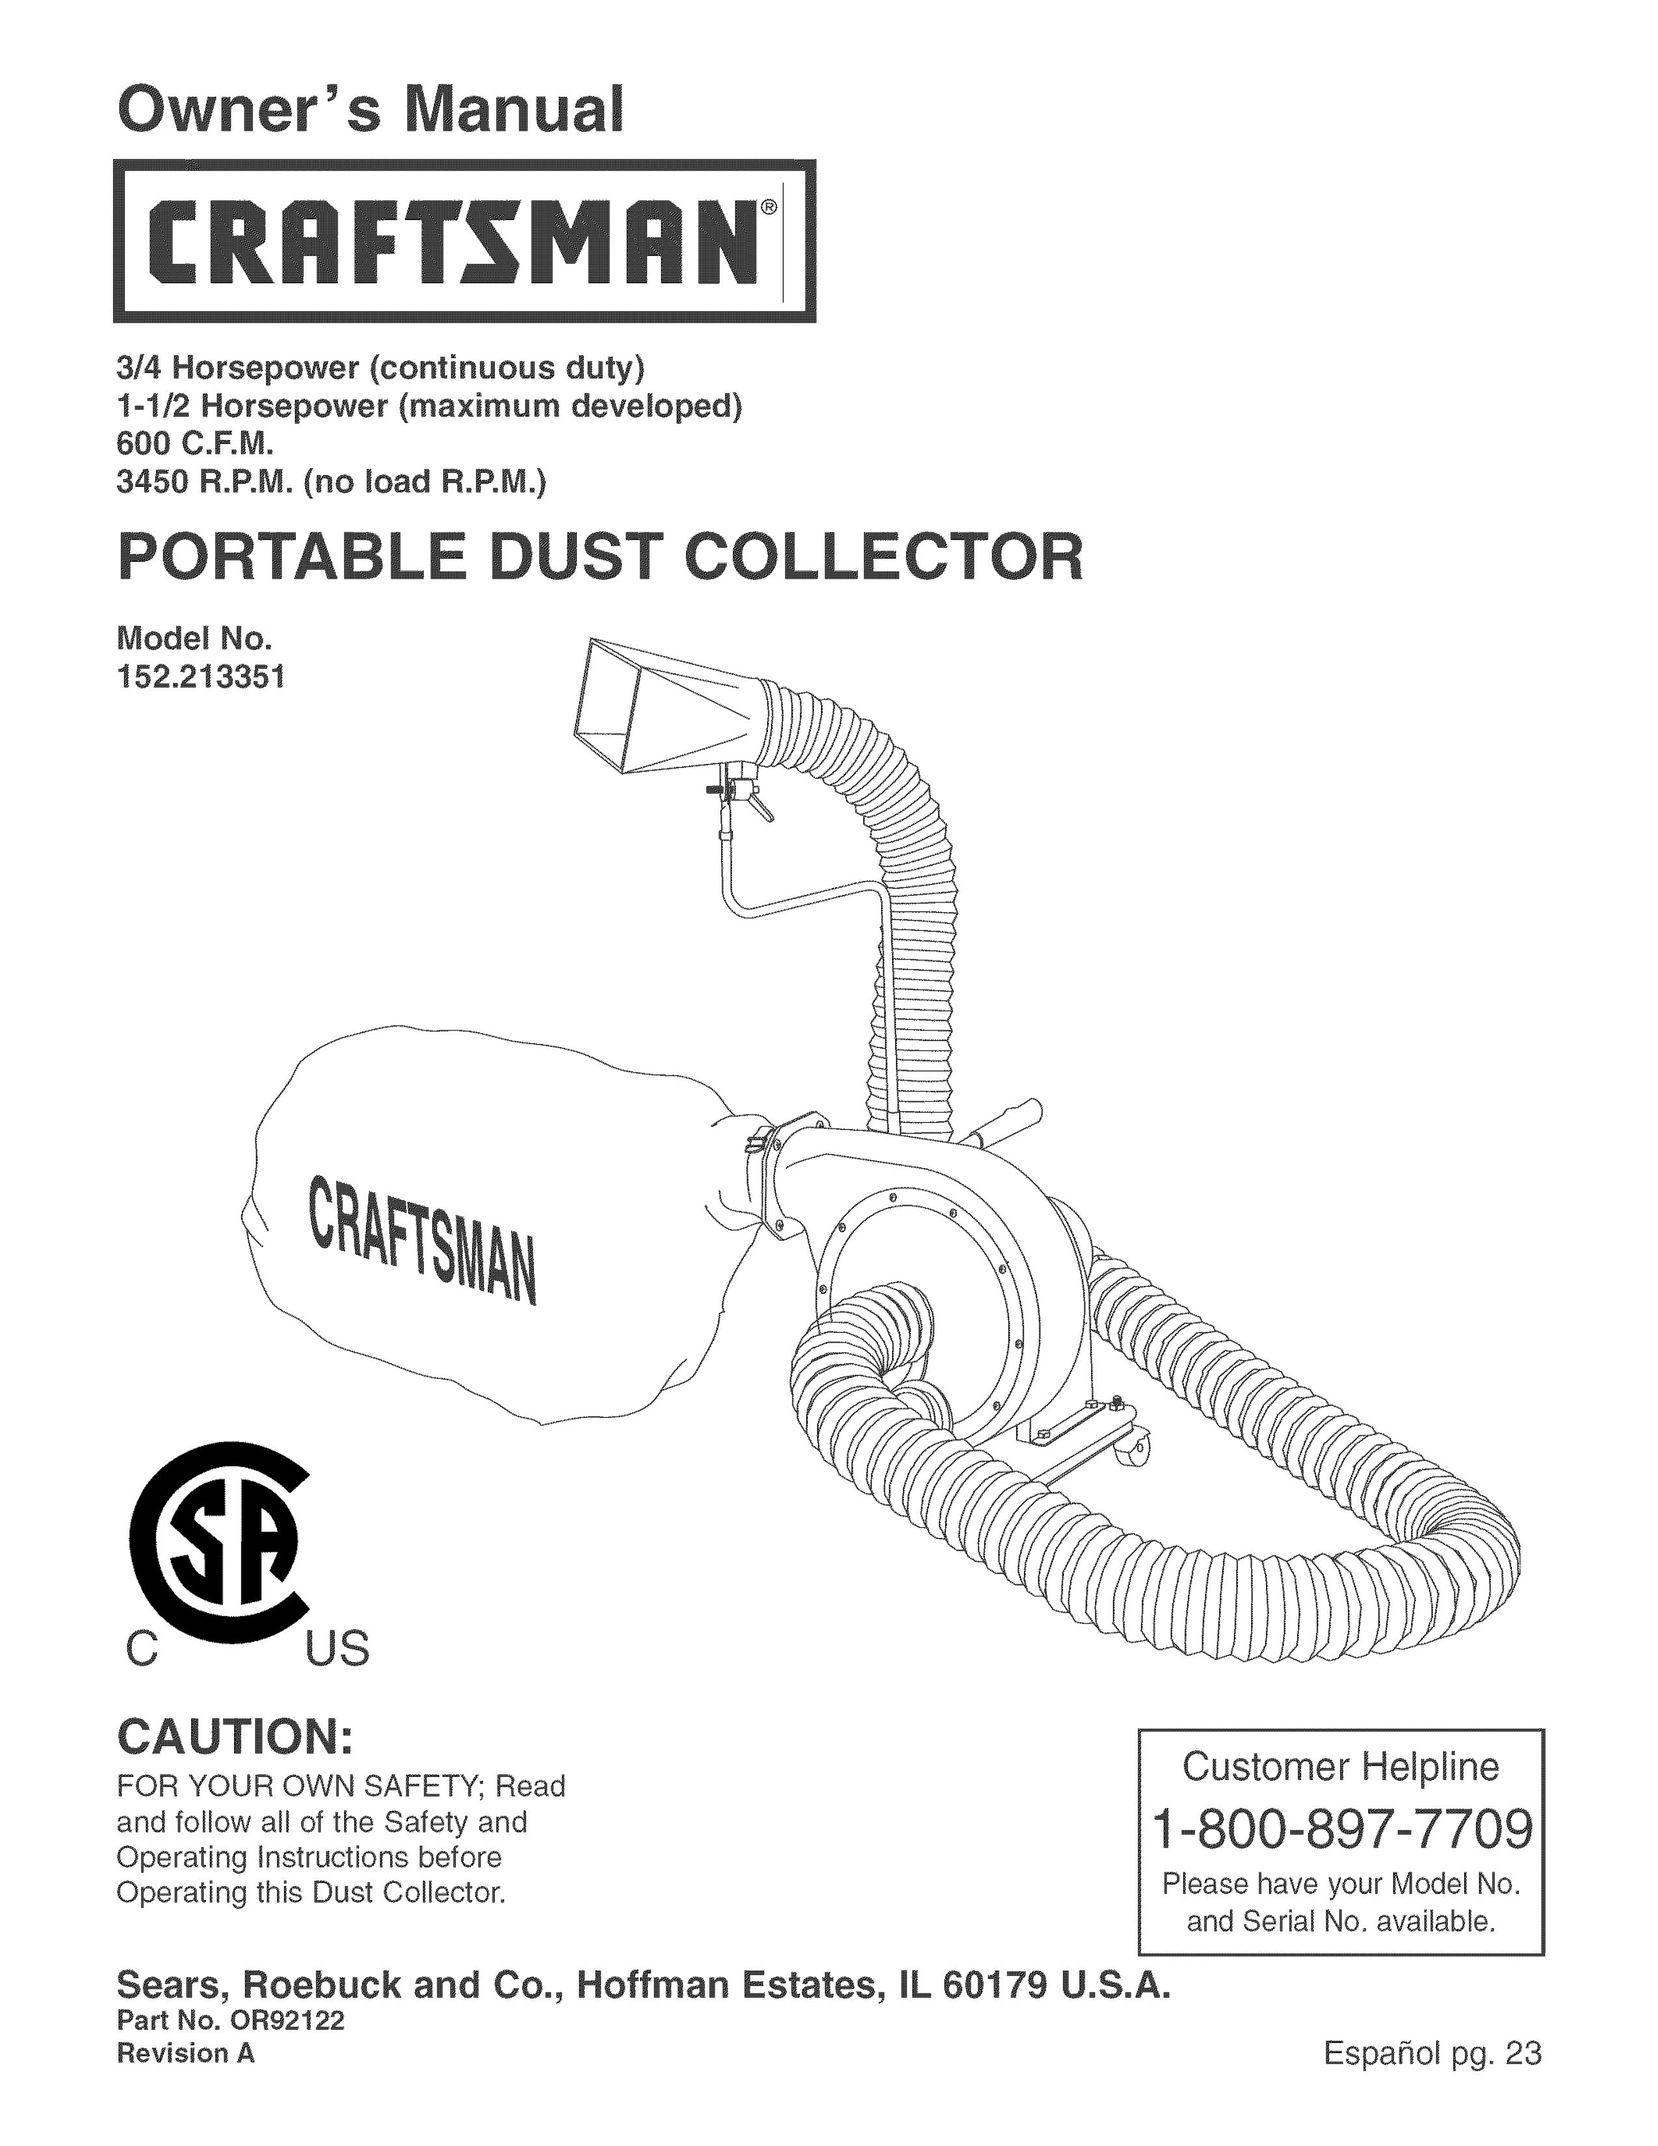 Craftsman 152.213351 Dust Collector User Manual